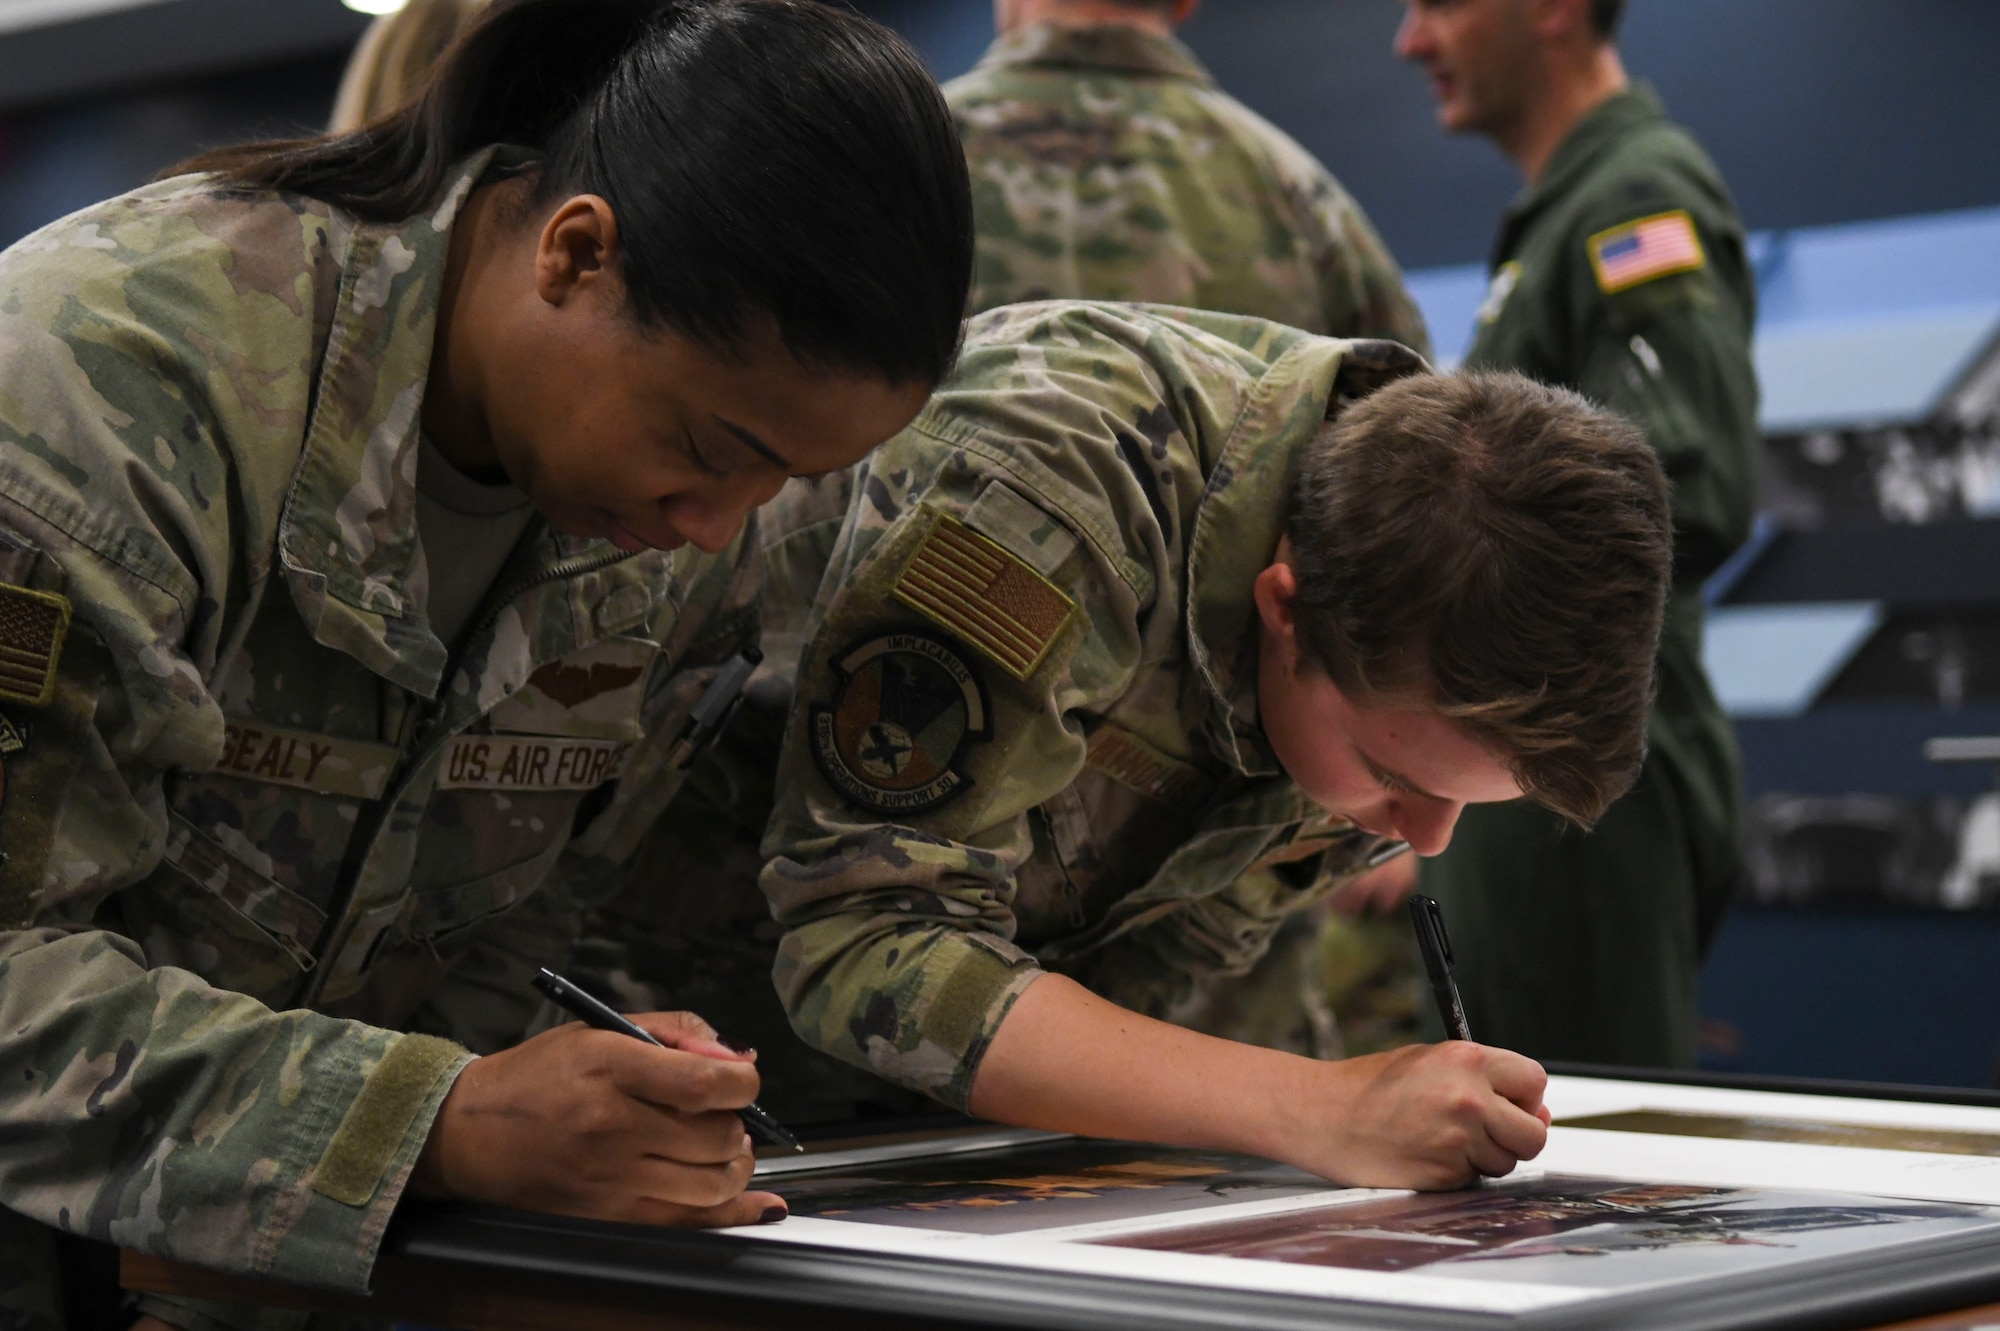 U.S. Air Force 1st Lts. Christyna Sealy, left, and Krisanna Reynolds, right, both members of the 1st Helicopter Squadron, leave behind notes on the squadron’s 80th anniversary heritage display at Joint Base Andrews, Md., April 11, 2024.